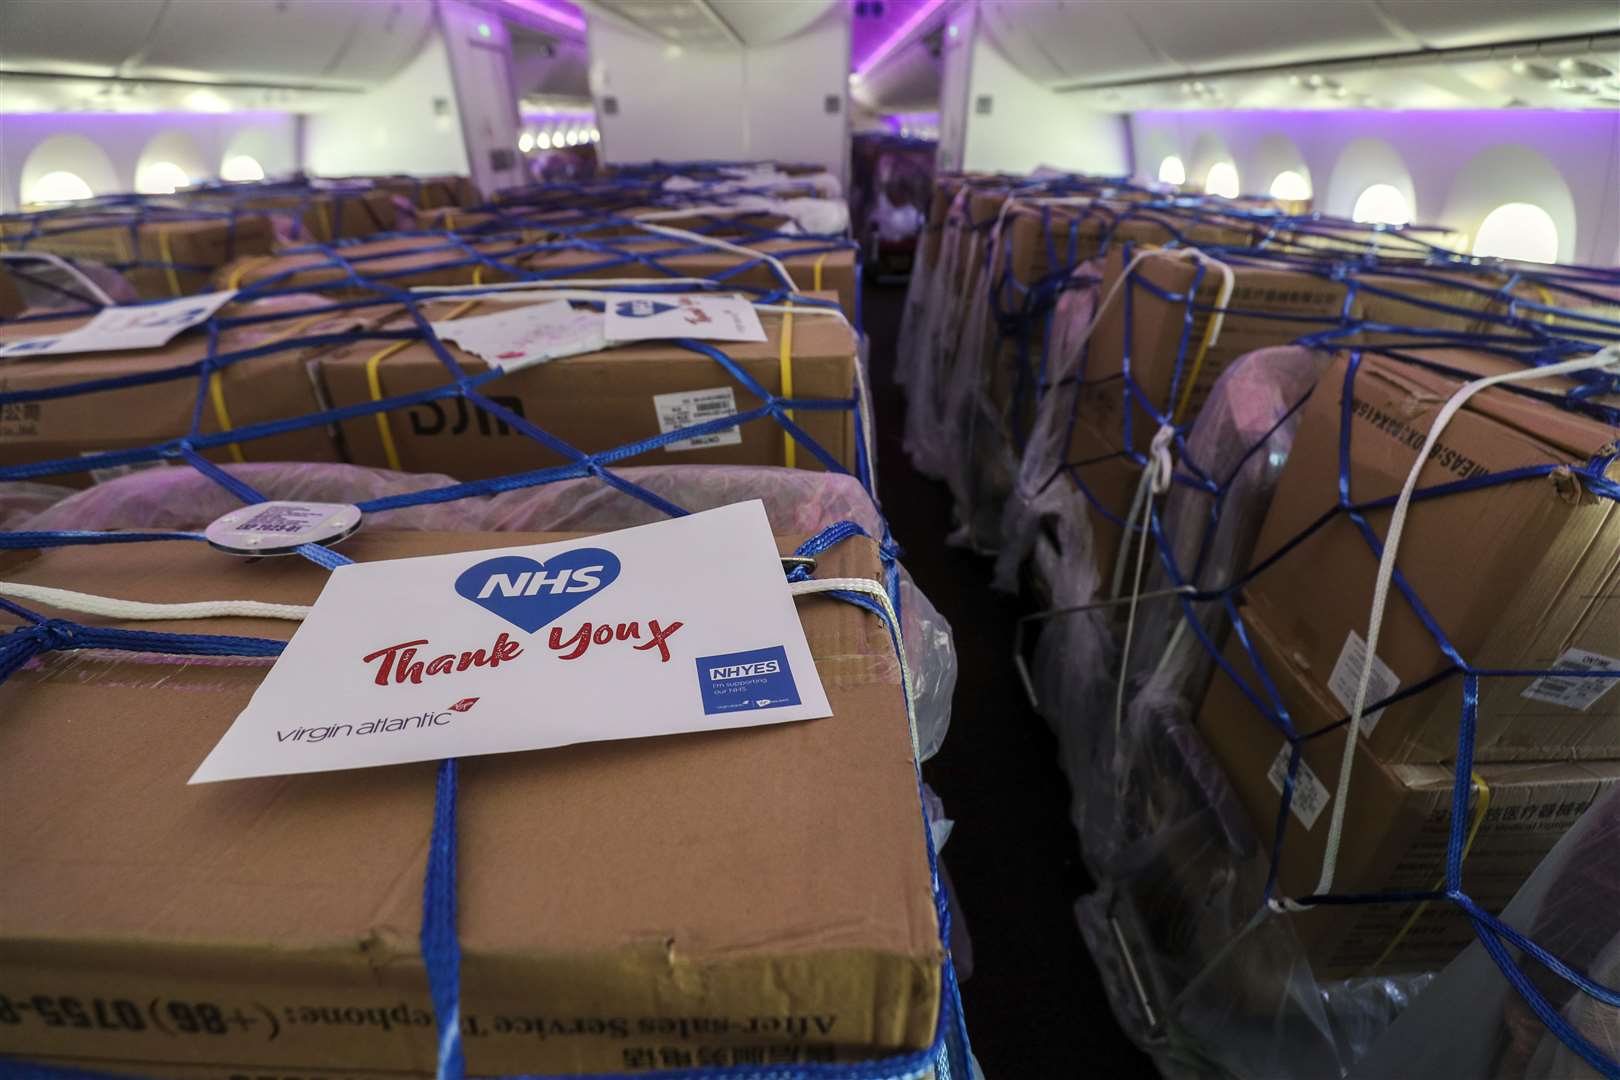 Cargo on the Virgin Atlantic charter flight which landed at Heathrow (Steve Parsons/PA)